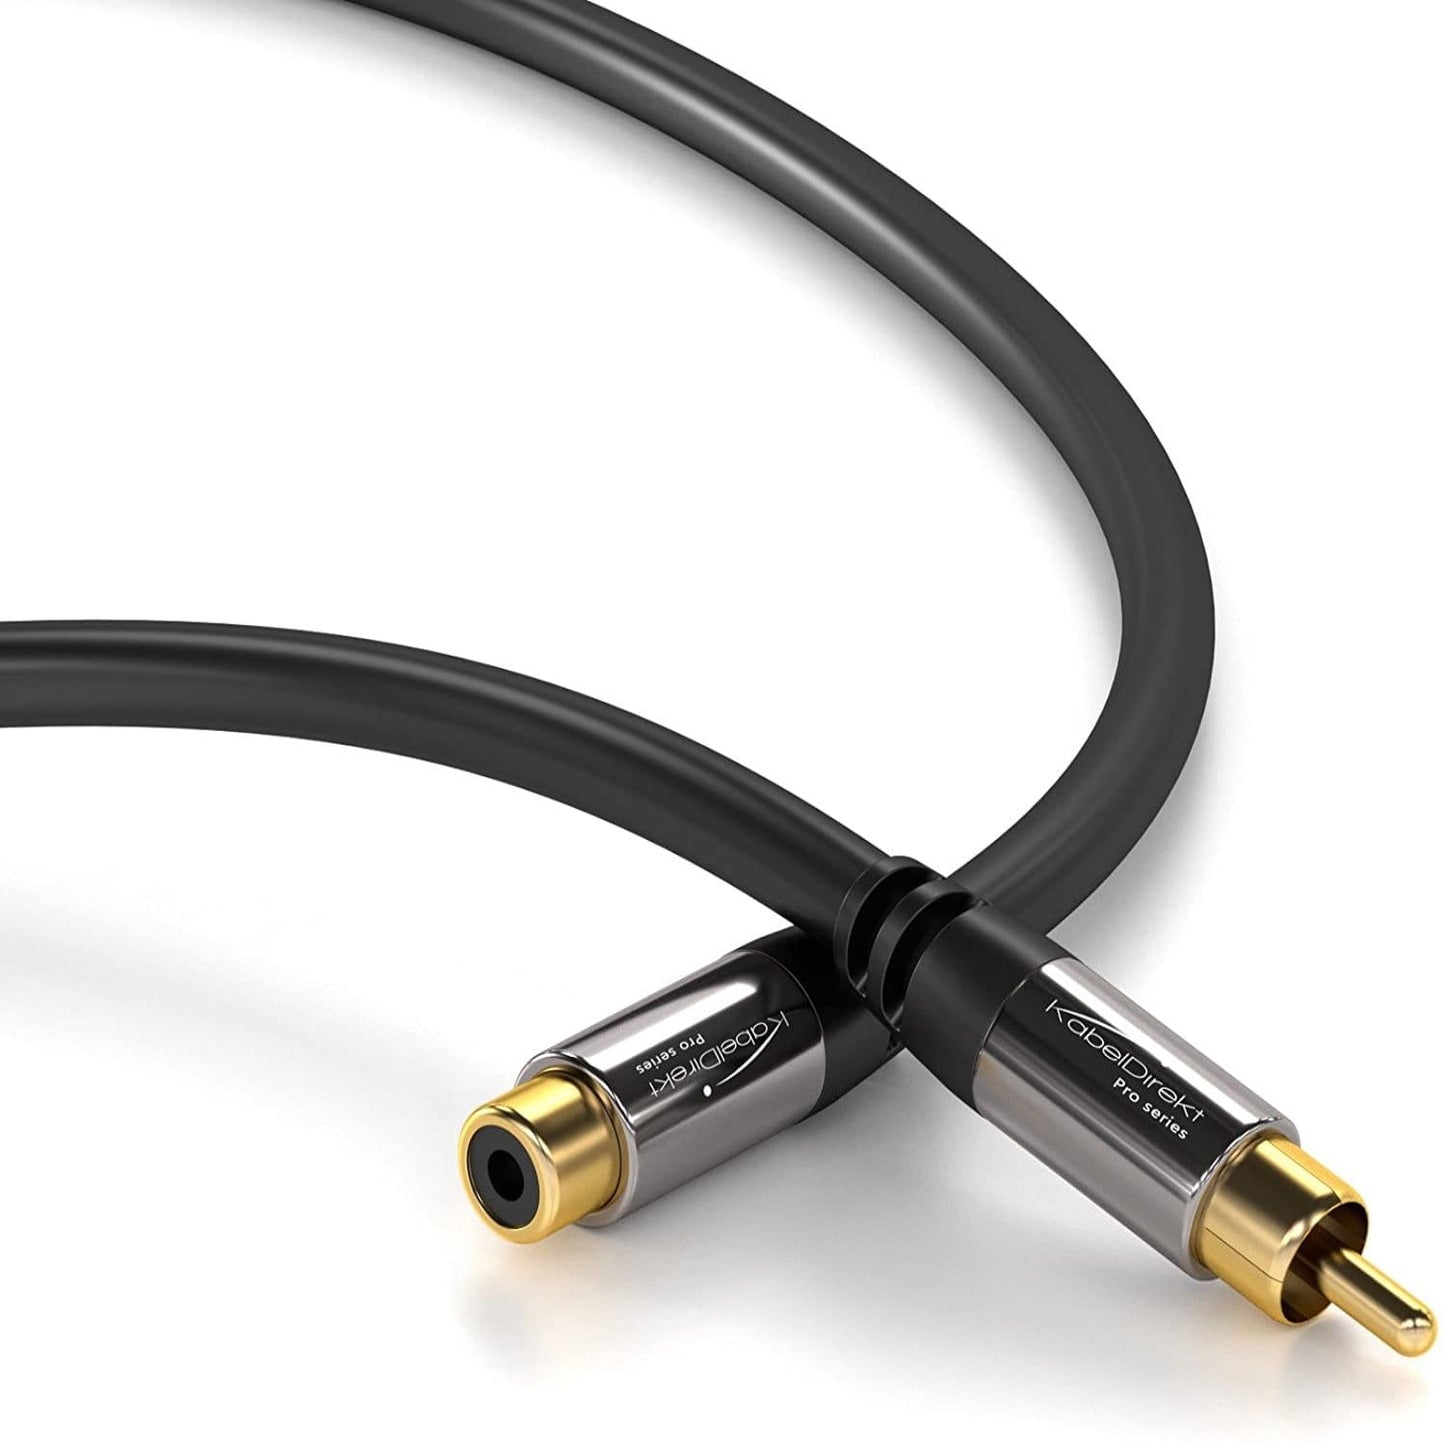 RCA extension cable - digital coaxial, audio / video, 75 ohms